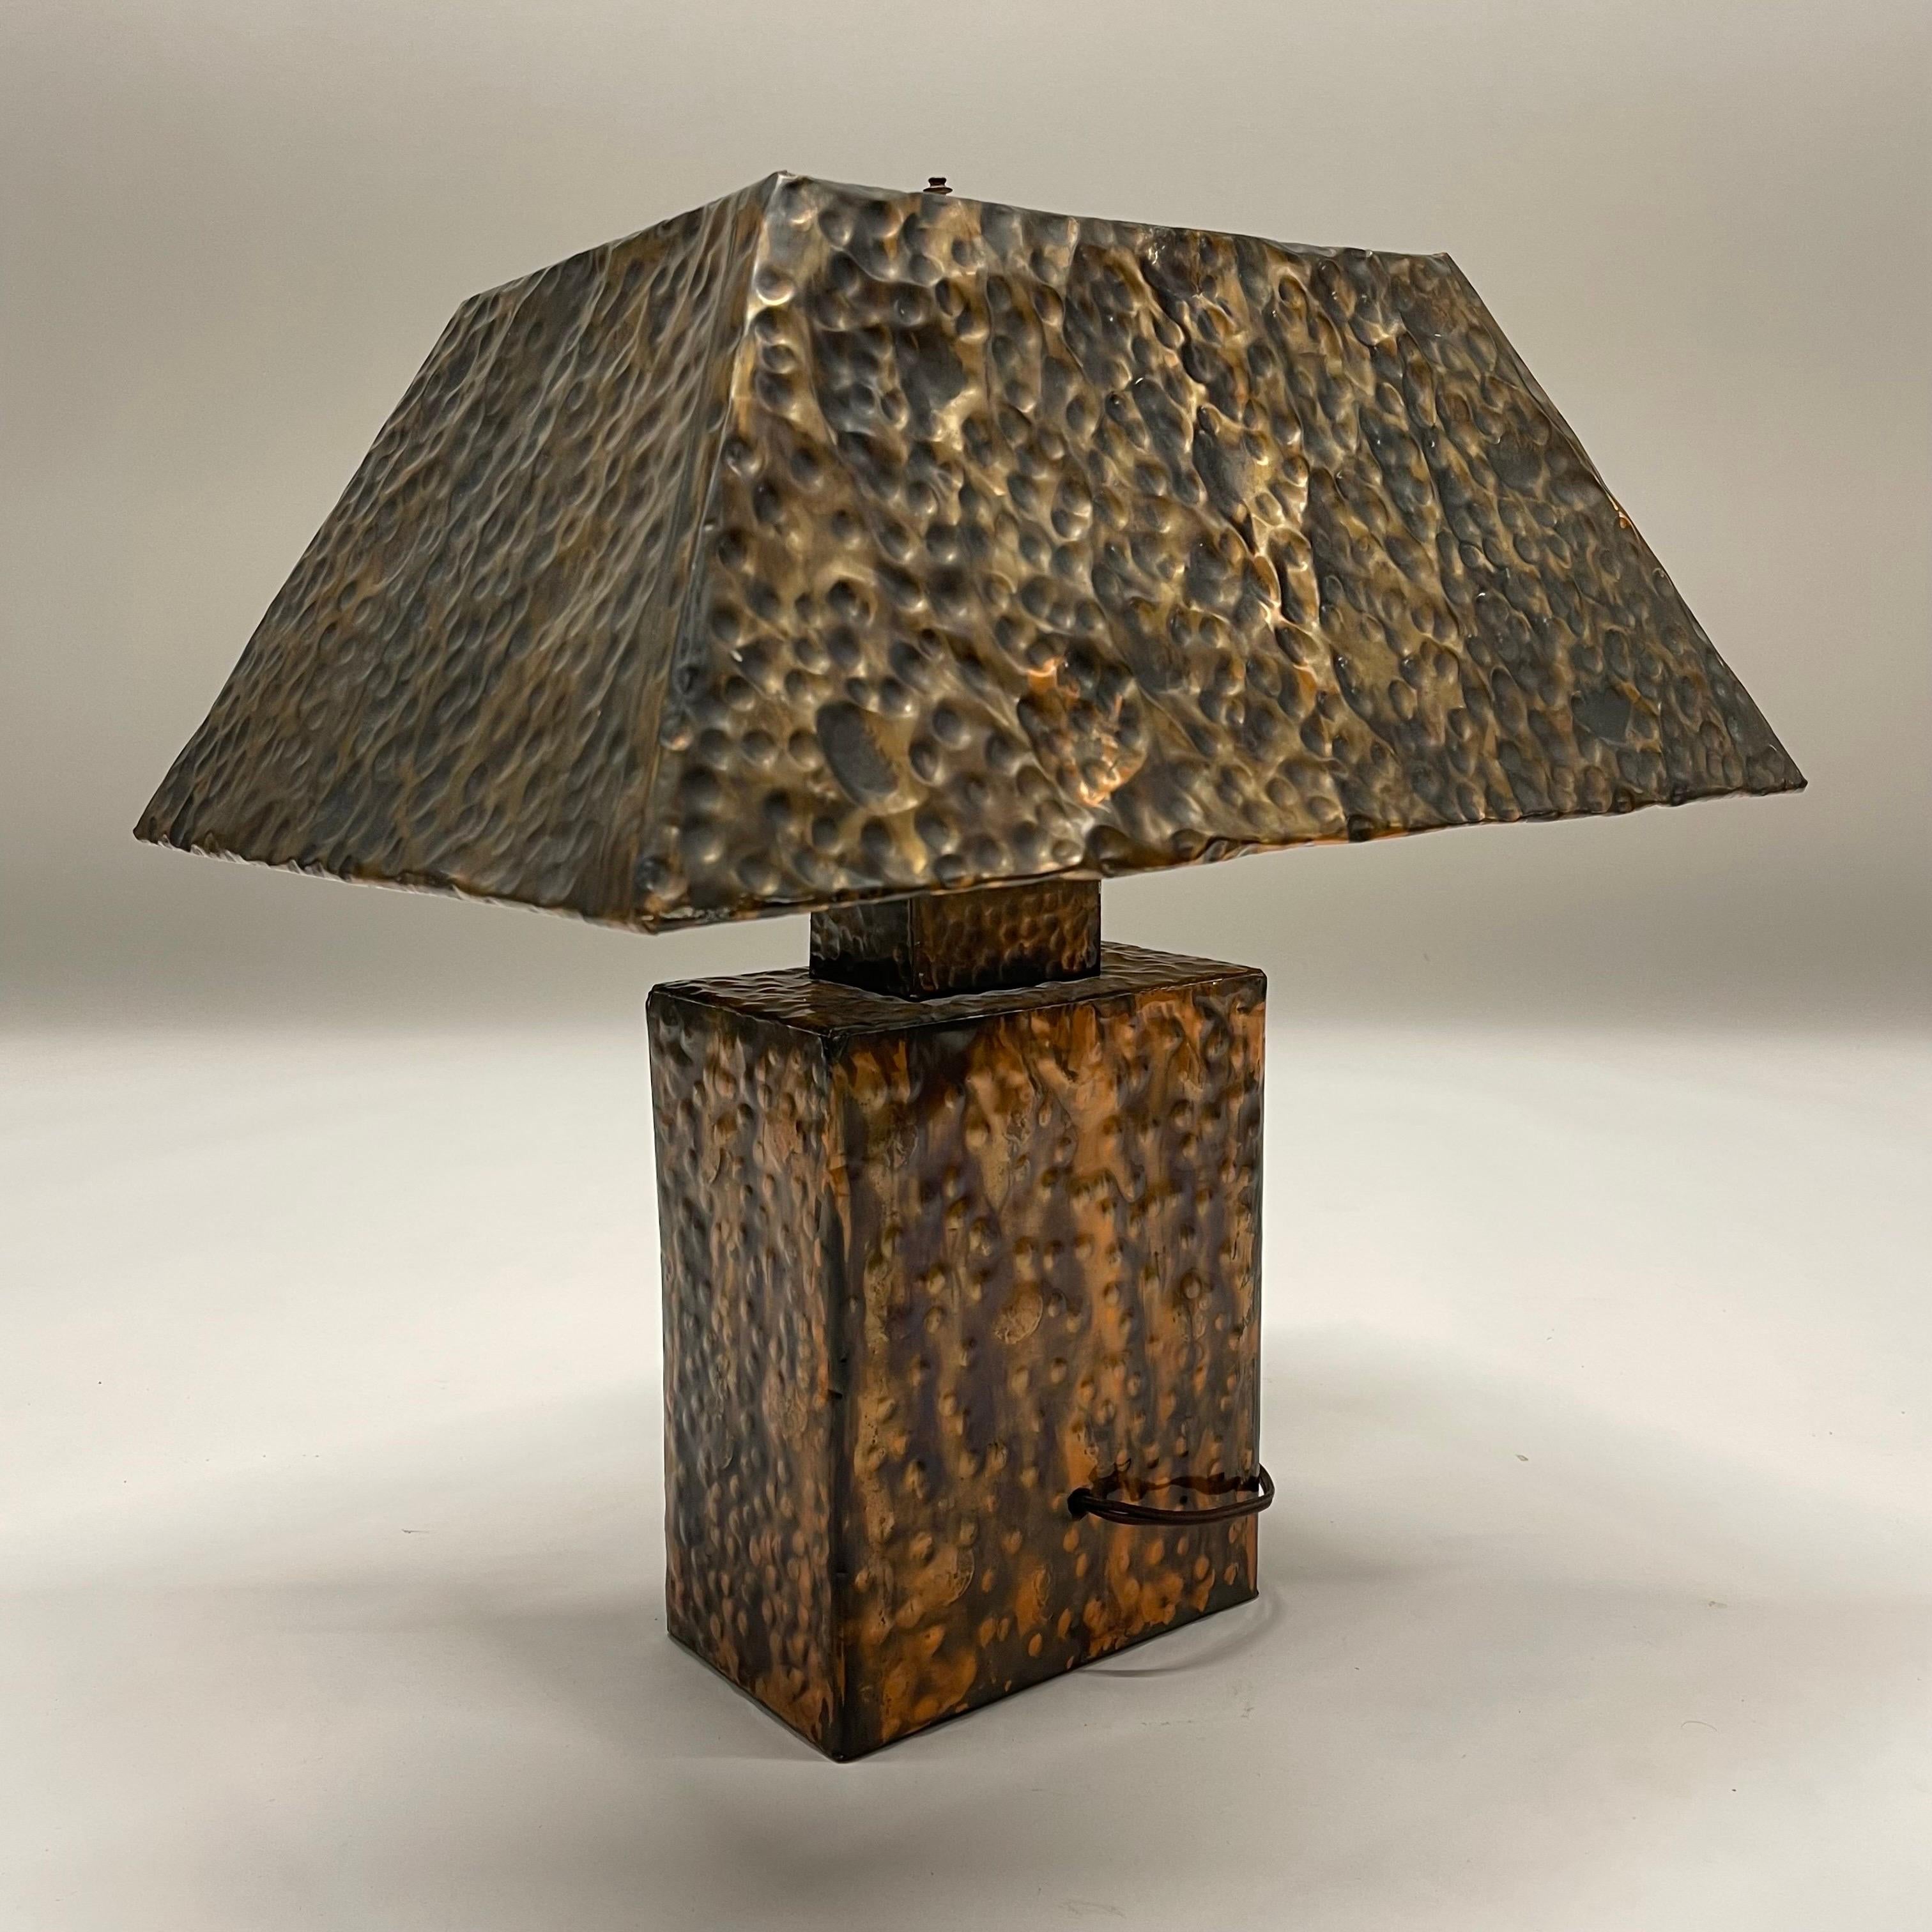 Italian Mid-Century Brutalist Hand Hammered Copper Lamp and Shade, Italy, 1970s For Sale 1